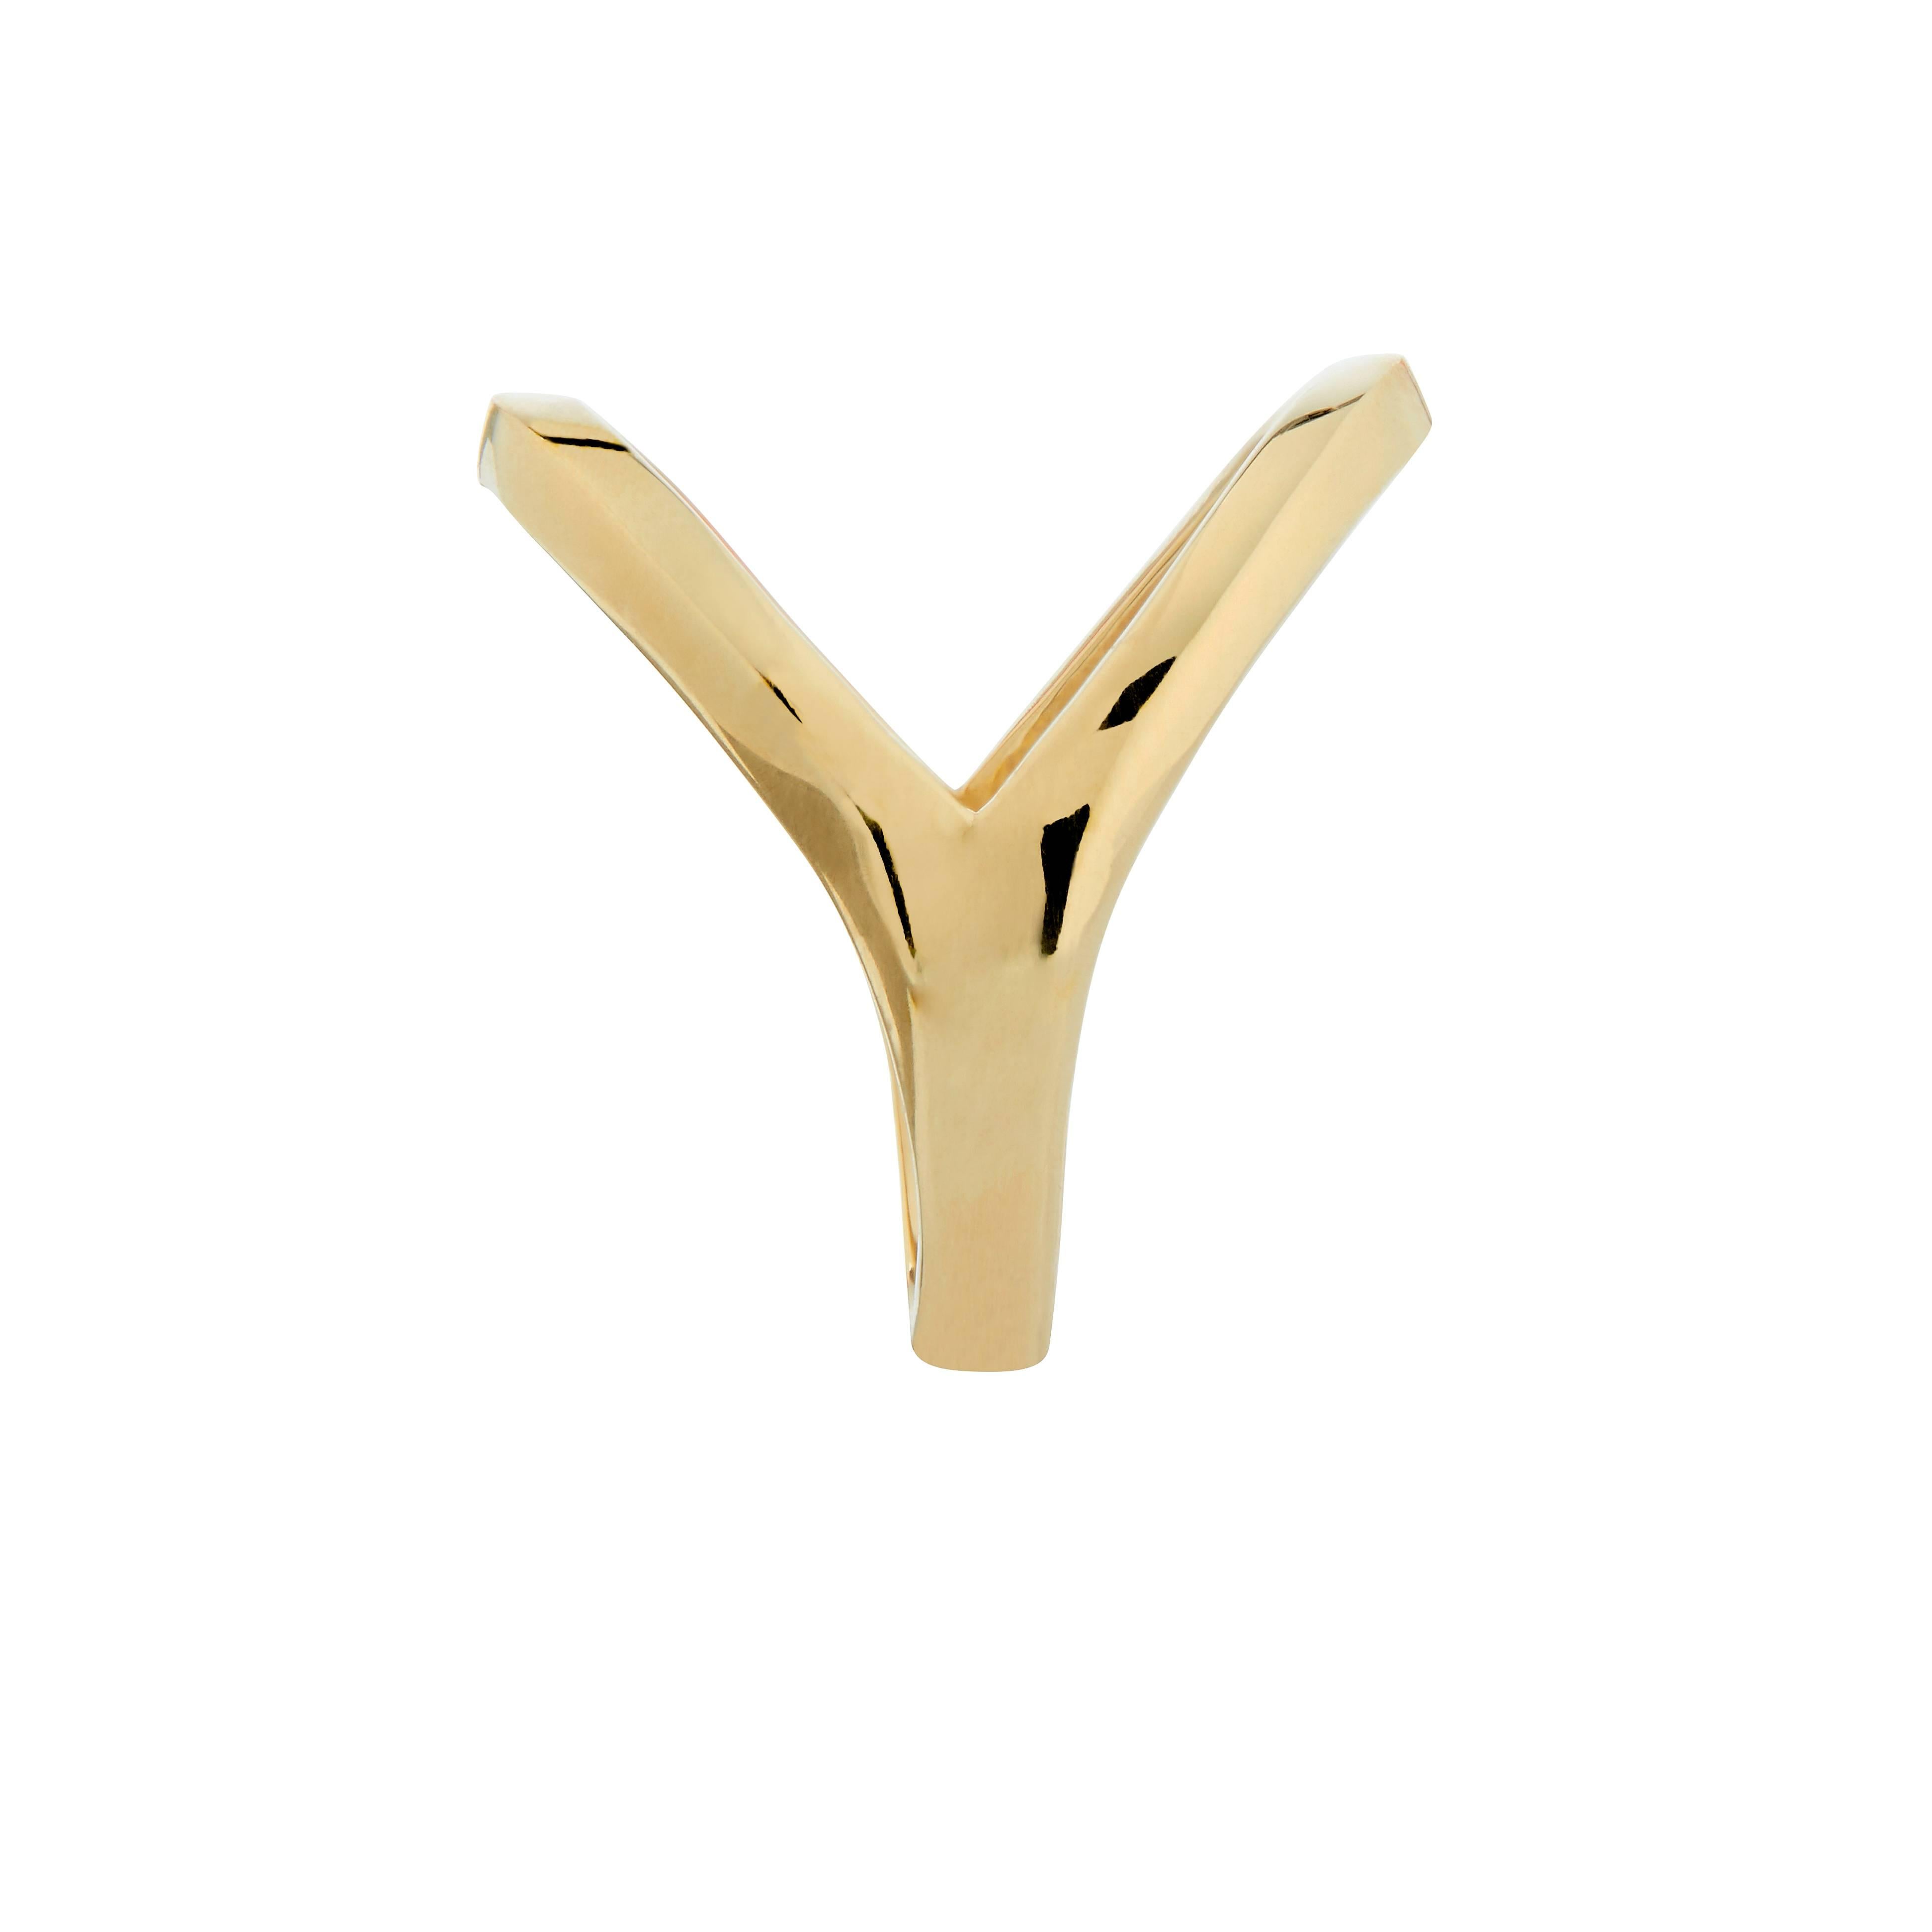 Zara Simon Ibiza Yellow Gold Ring In New Condition For Sale In London, GB